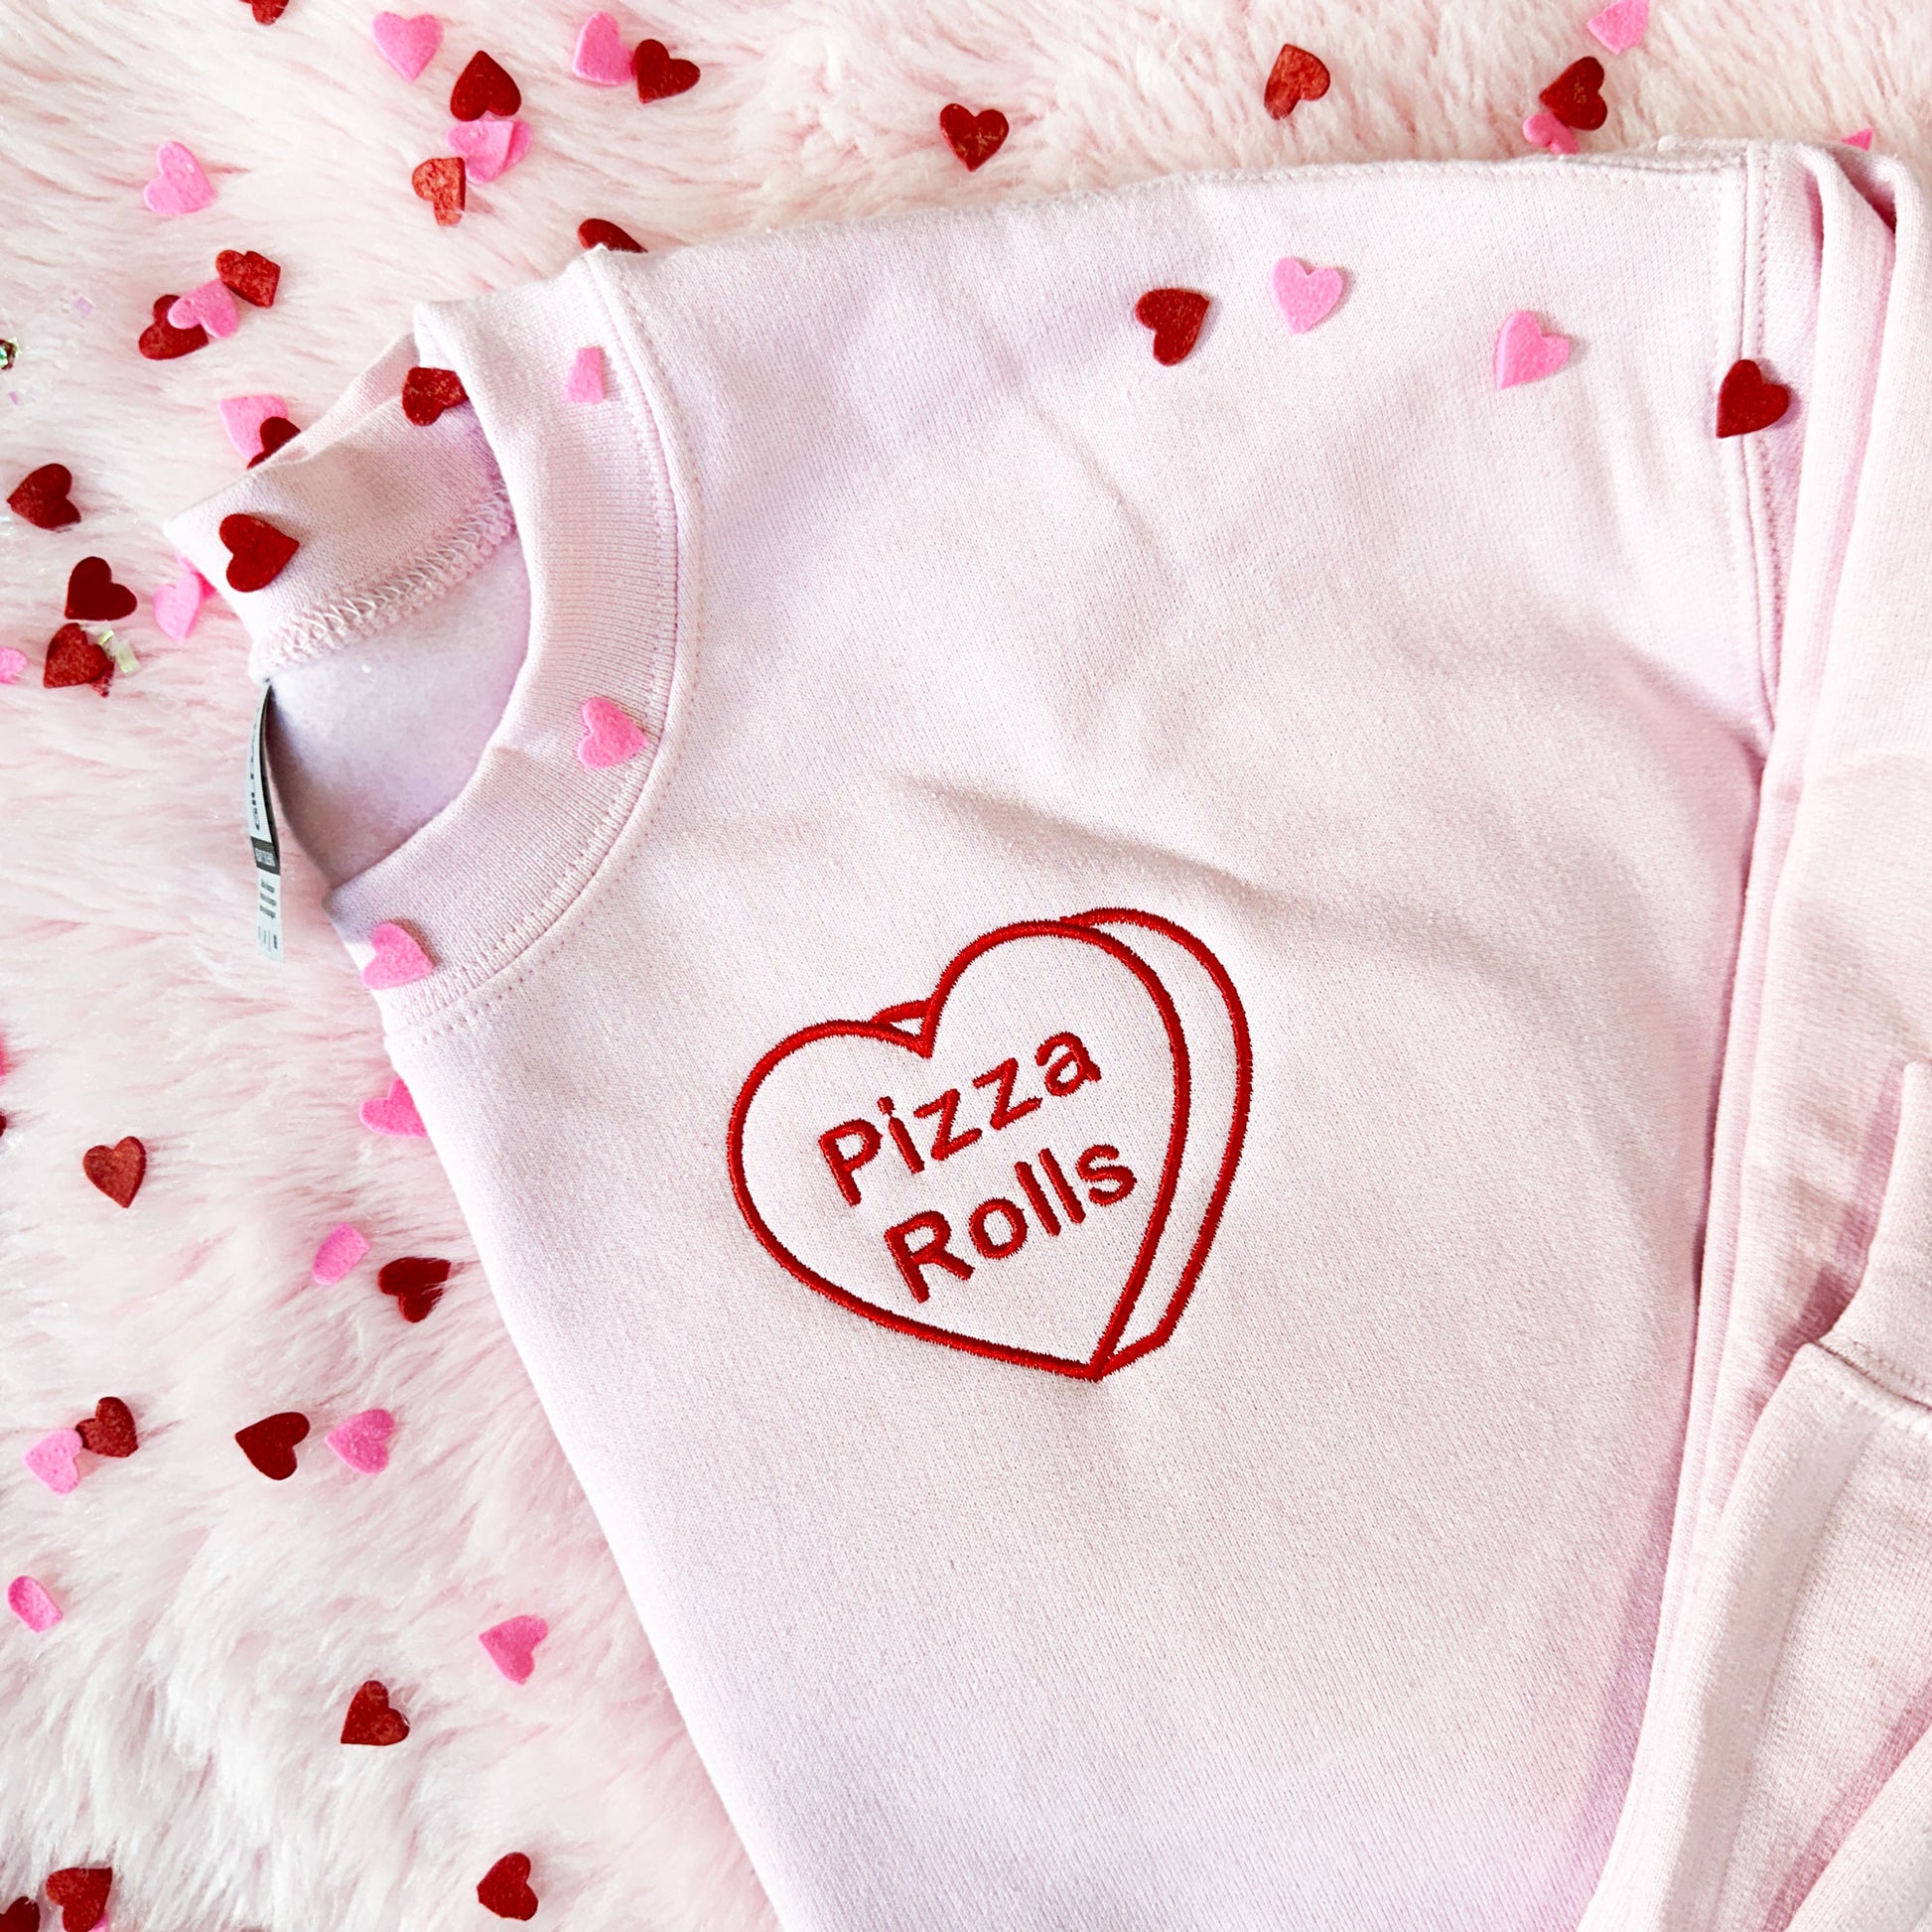 Flat lay image of a pink crewneck sweatshirt with a candy heart embroidered design that says pizza rolls in red thread 